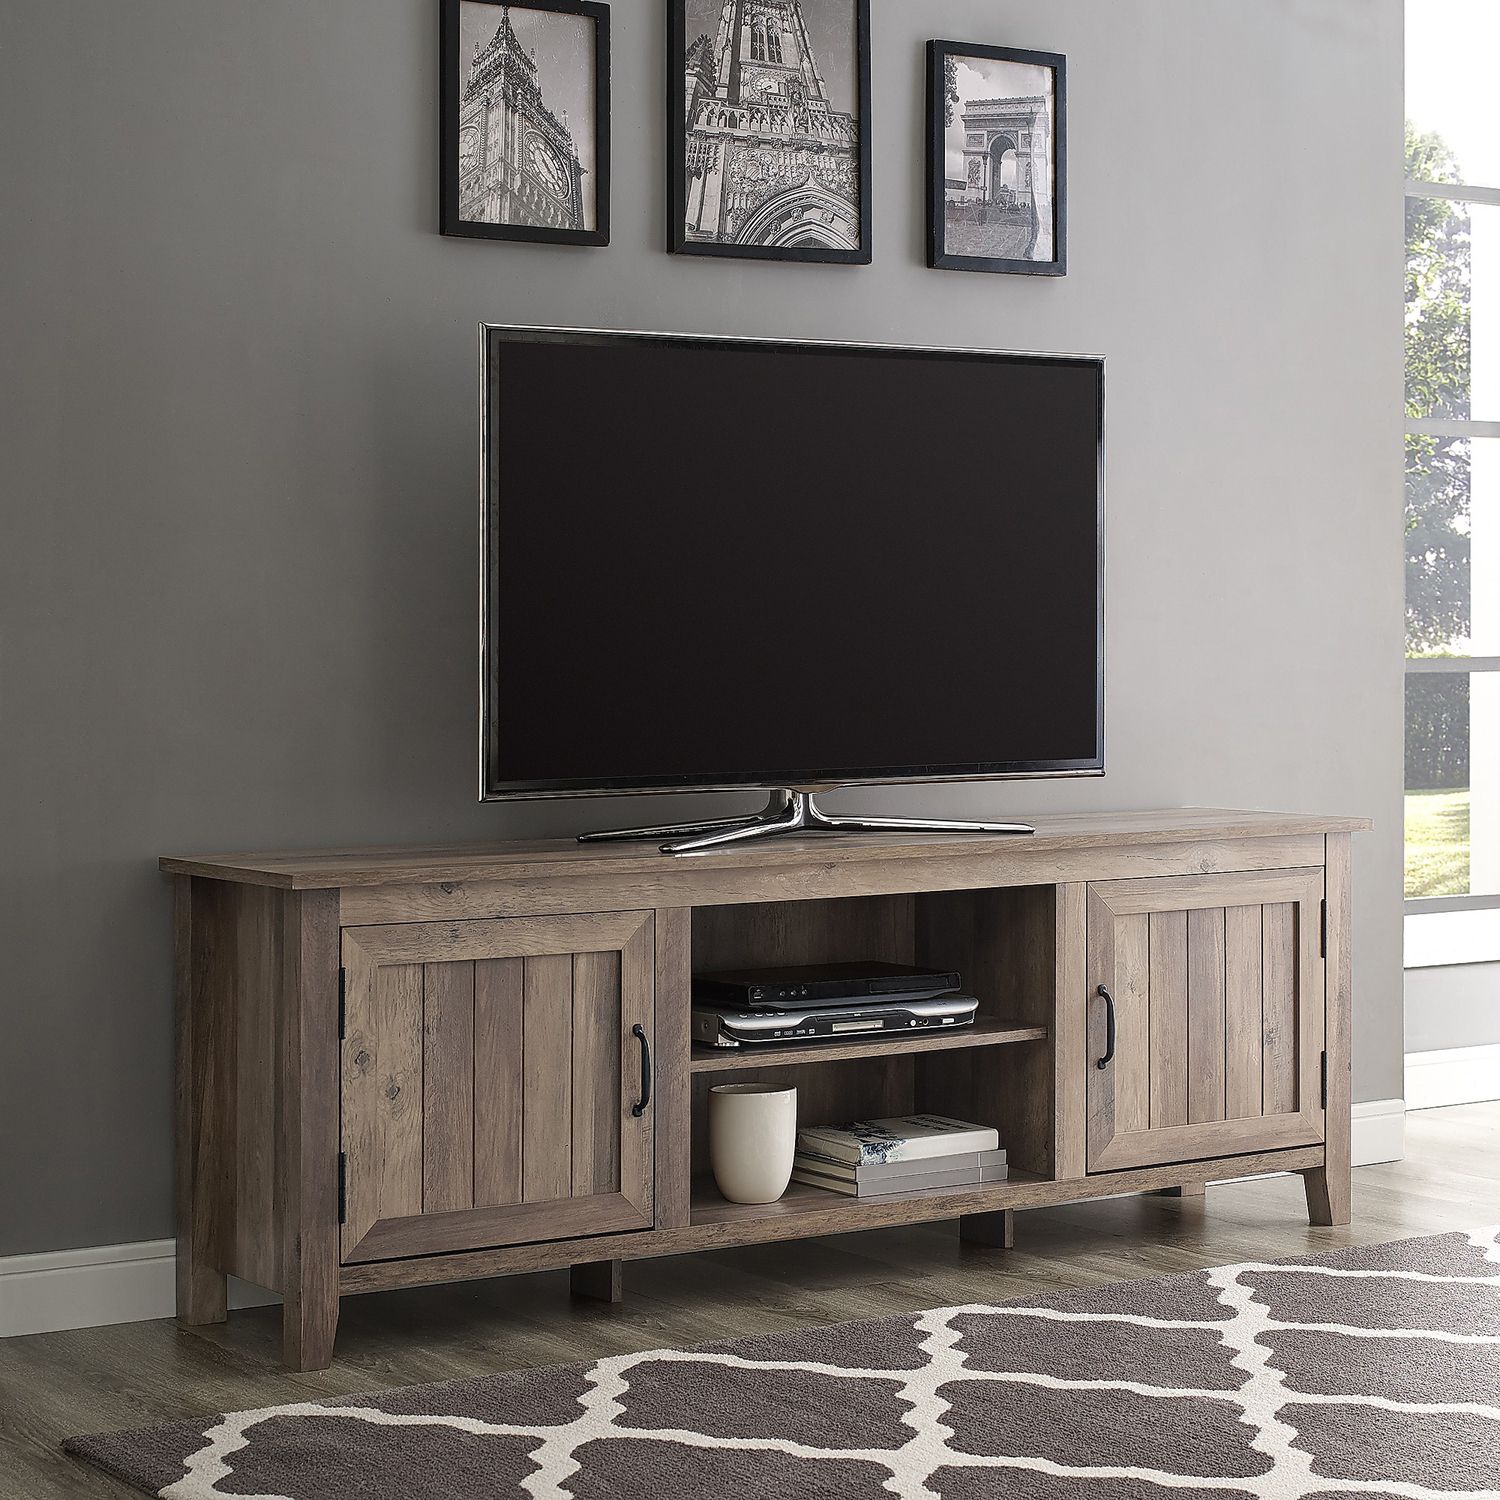 2019 Farmhouse Tv Stands For 70 Inch Tv Within Modern Farmhouse 70" Tv Stand With Beadboard Doors – Pier1 (Photo 15 of 15)